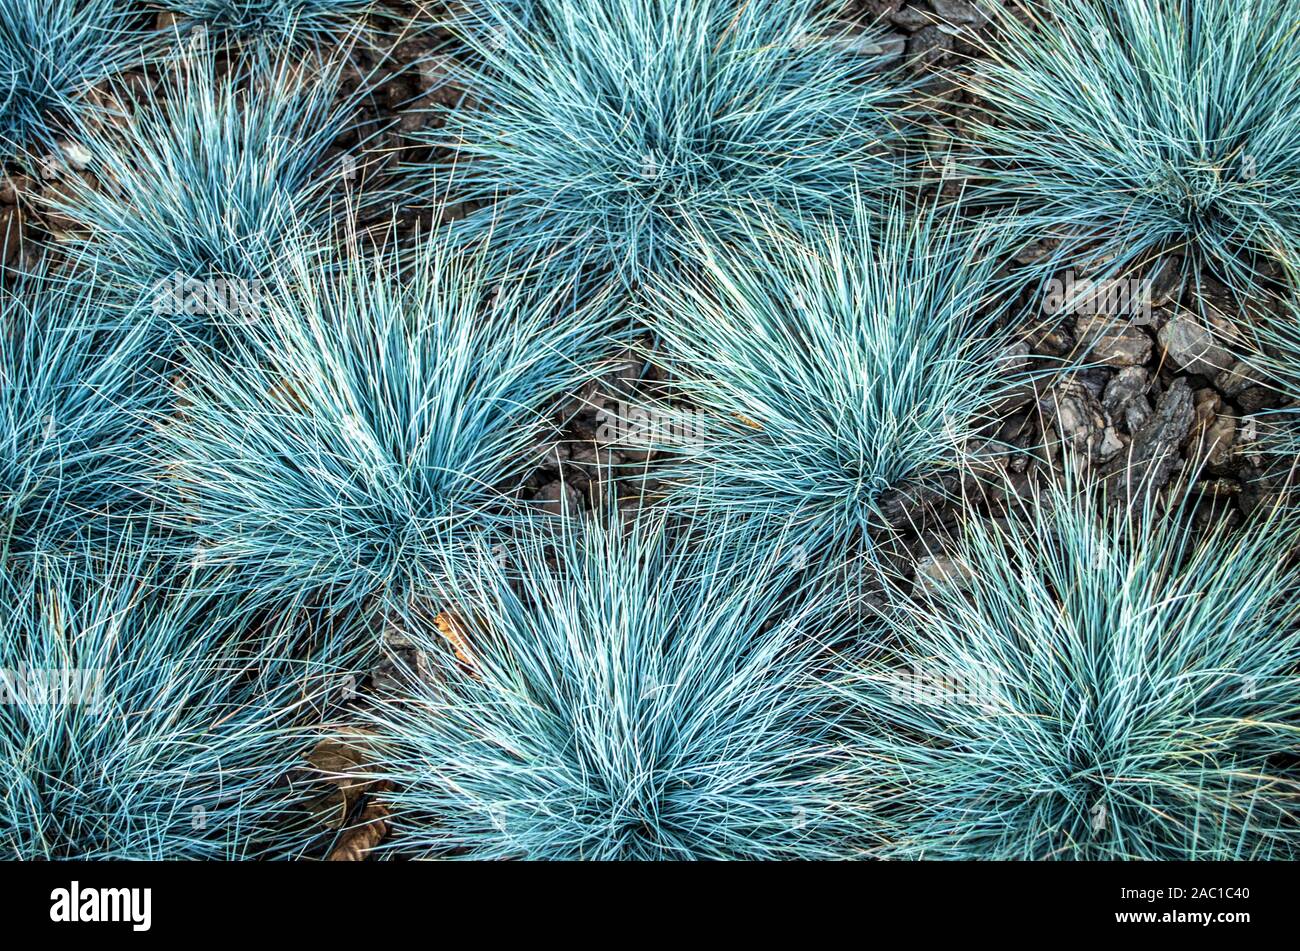 Festuca glauca blue bunting is a decorative grass. Stock Photo